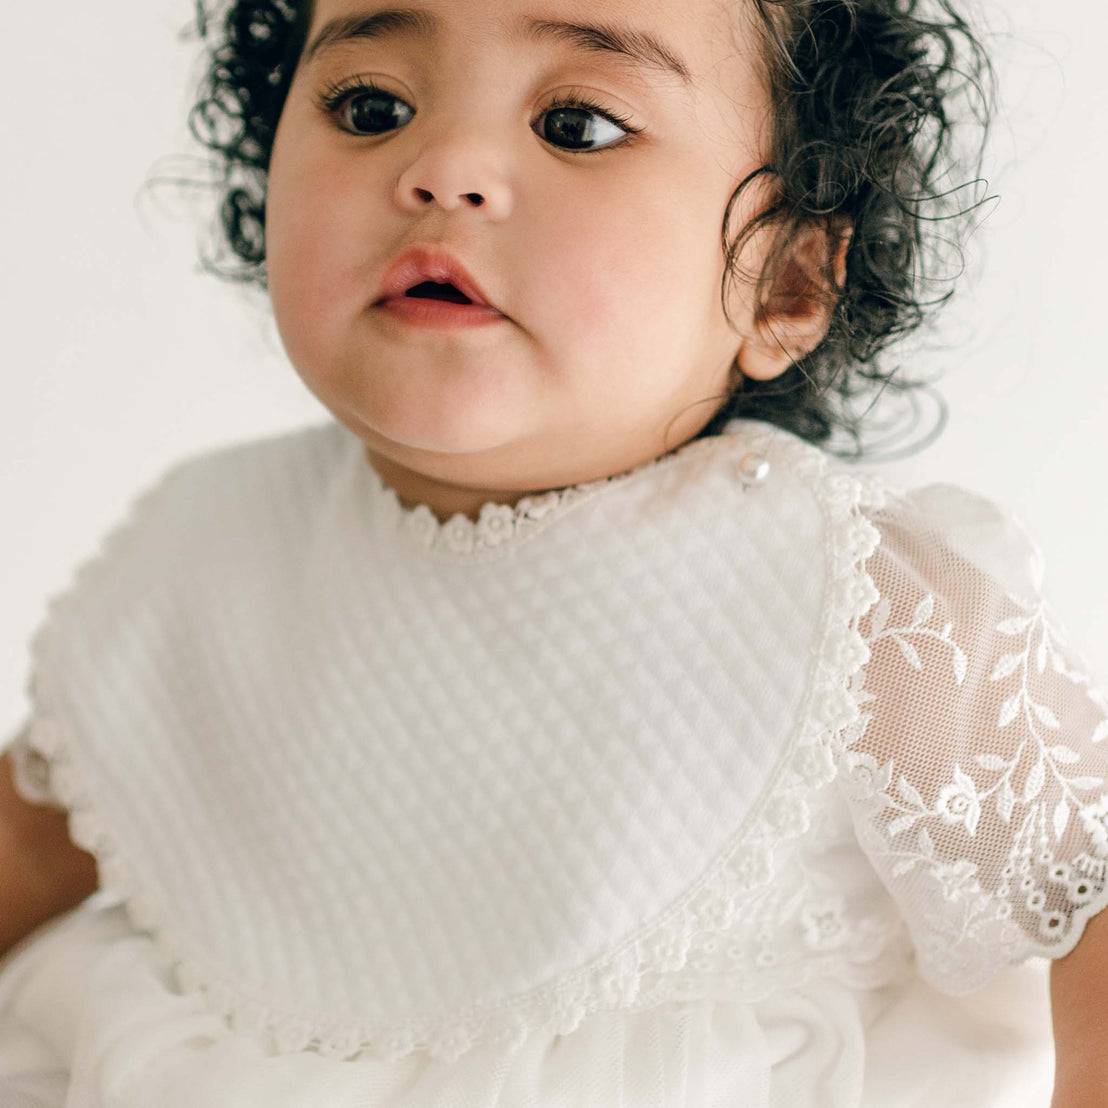 A young child with curly hair wearing a white lace special occasion dress is shown in this close-up image. The child has an Ella Bib with a quilted pattern and lace trim, and is looking slightly upwards. The background is plain and light-colored.